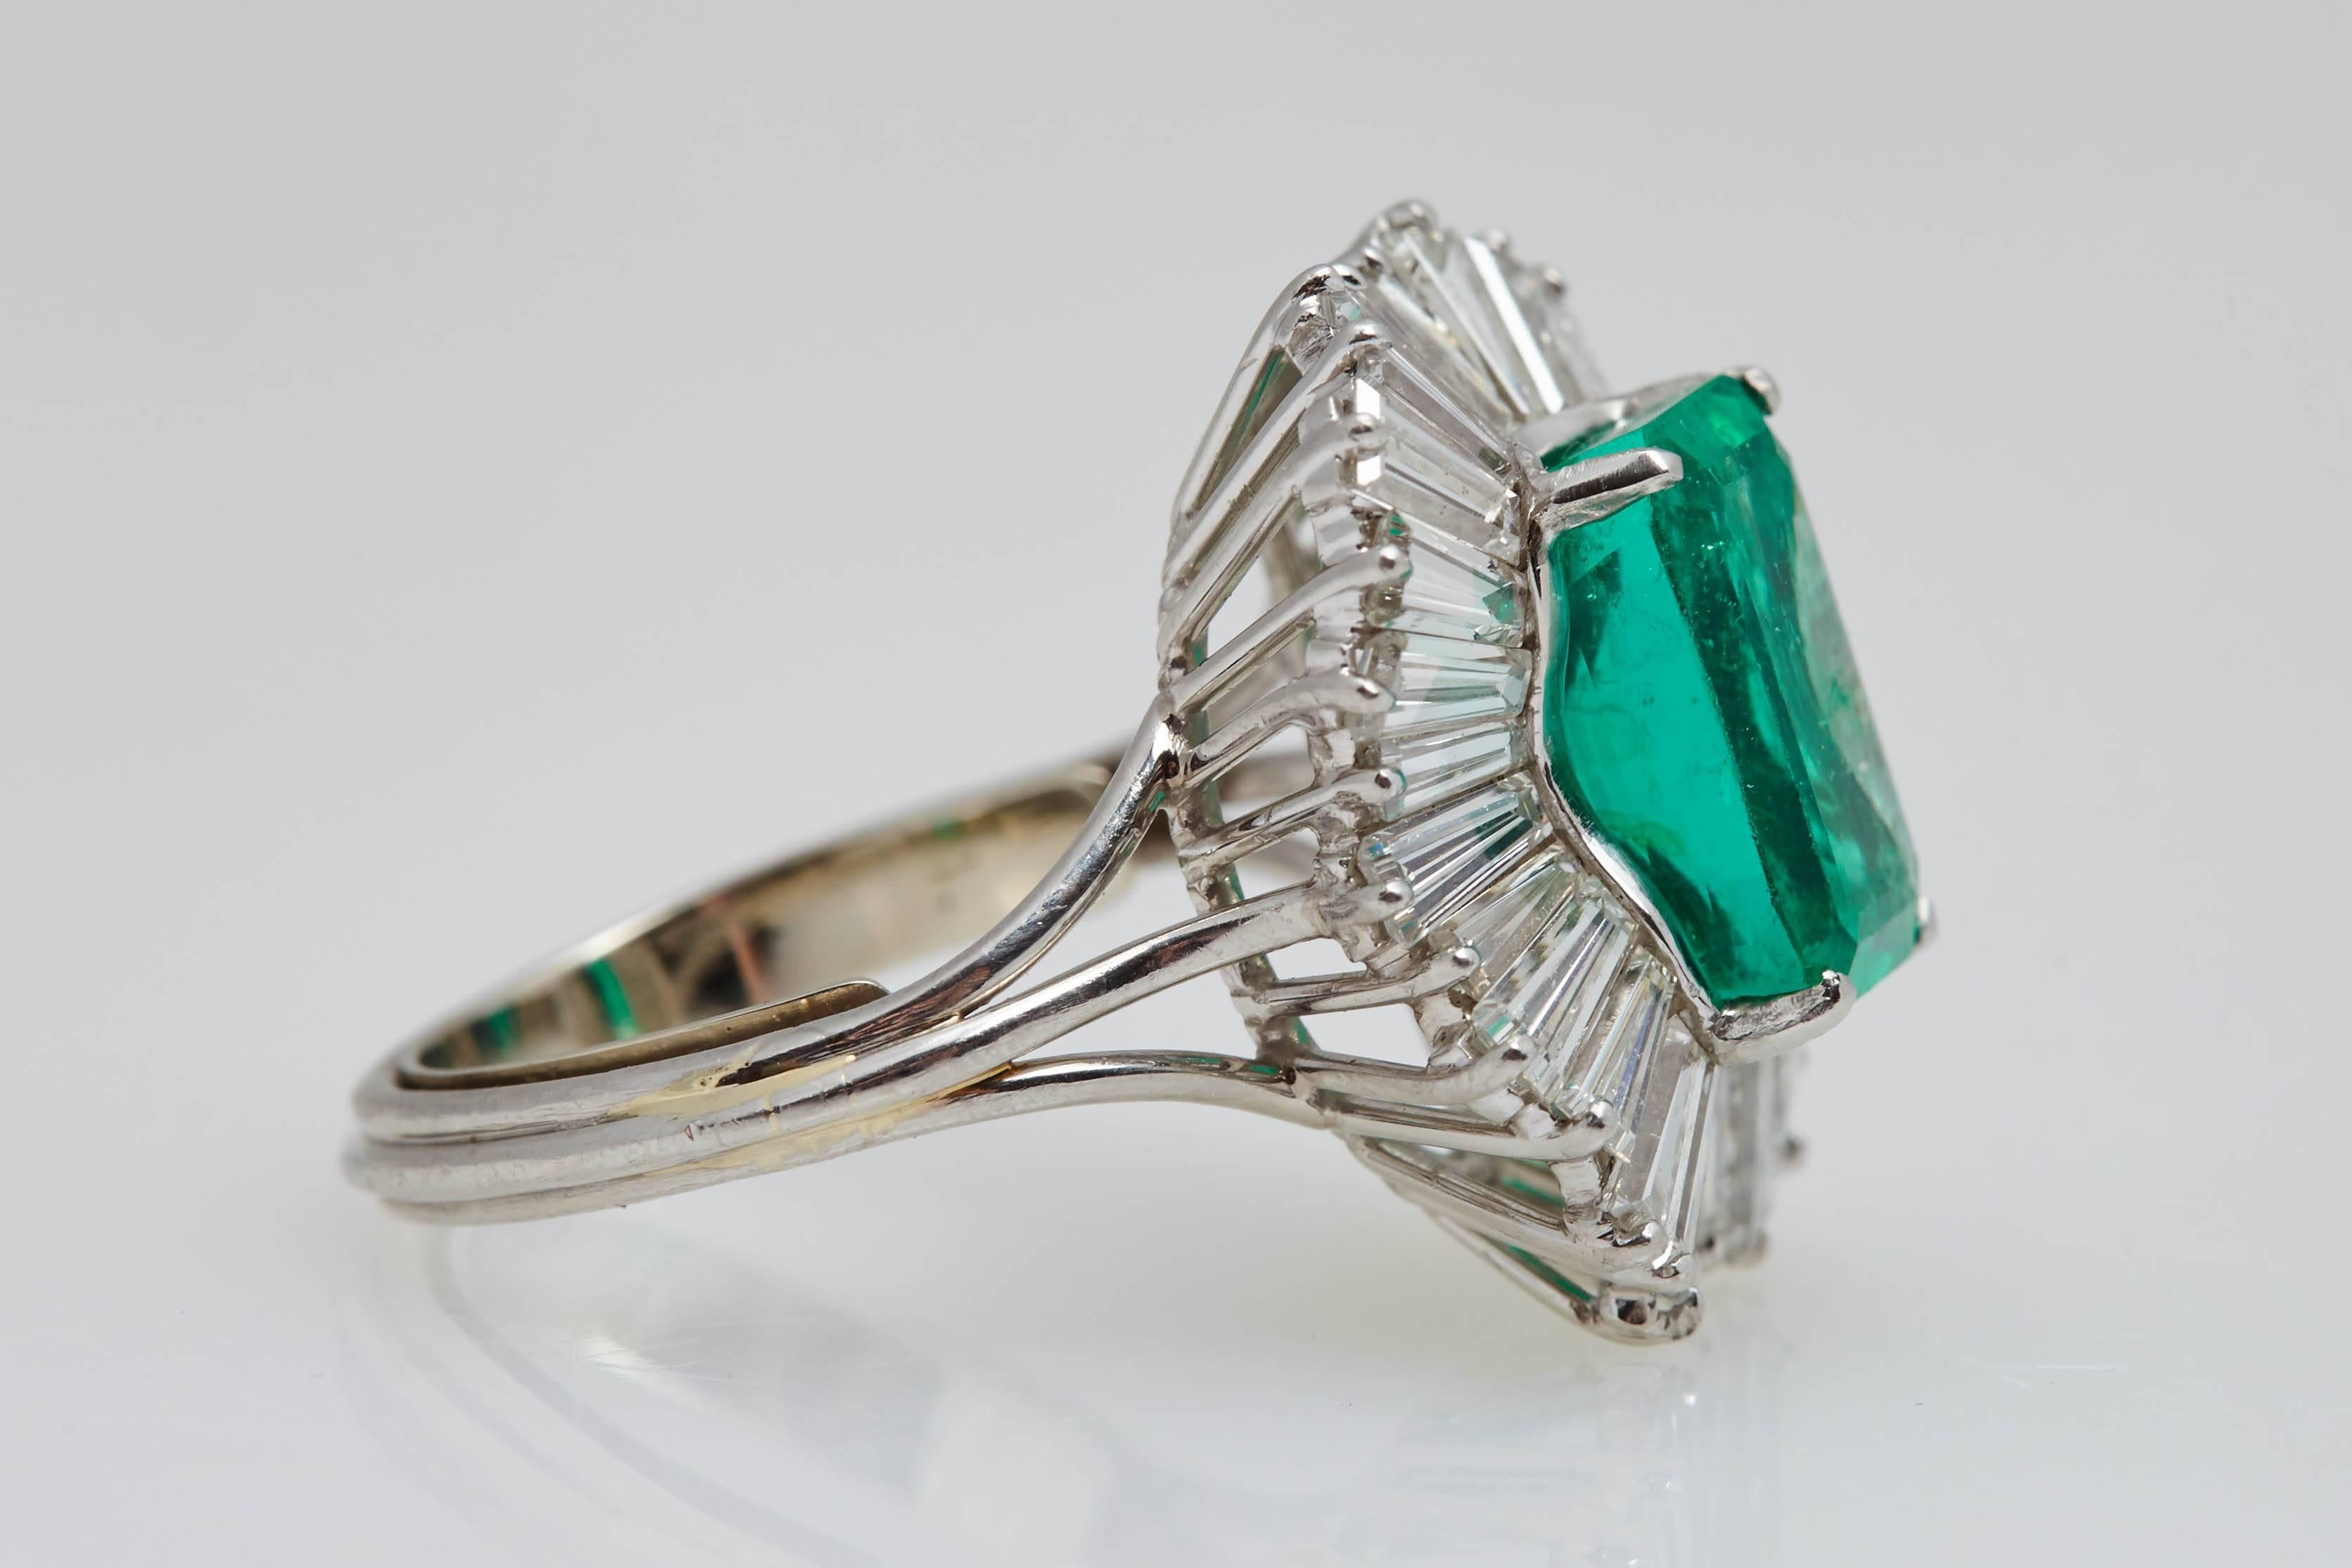 A Columbian emerald weighing 5.42 carats surrounded by approximately 3.50 carats of tapered baguette shaped diamonds mounted in a platinum ring. The emerald measures 12.3 mm. in length and 7.8 mm. in width. The ring is a size 8 1/2 and can be